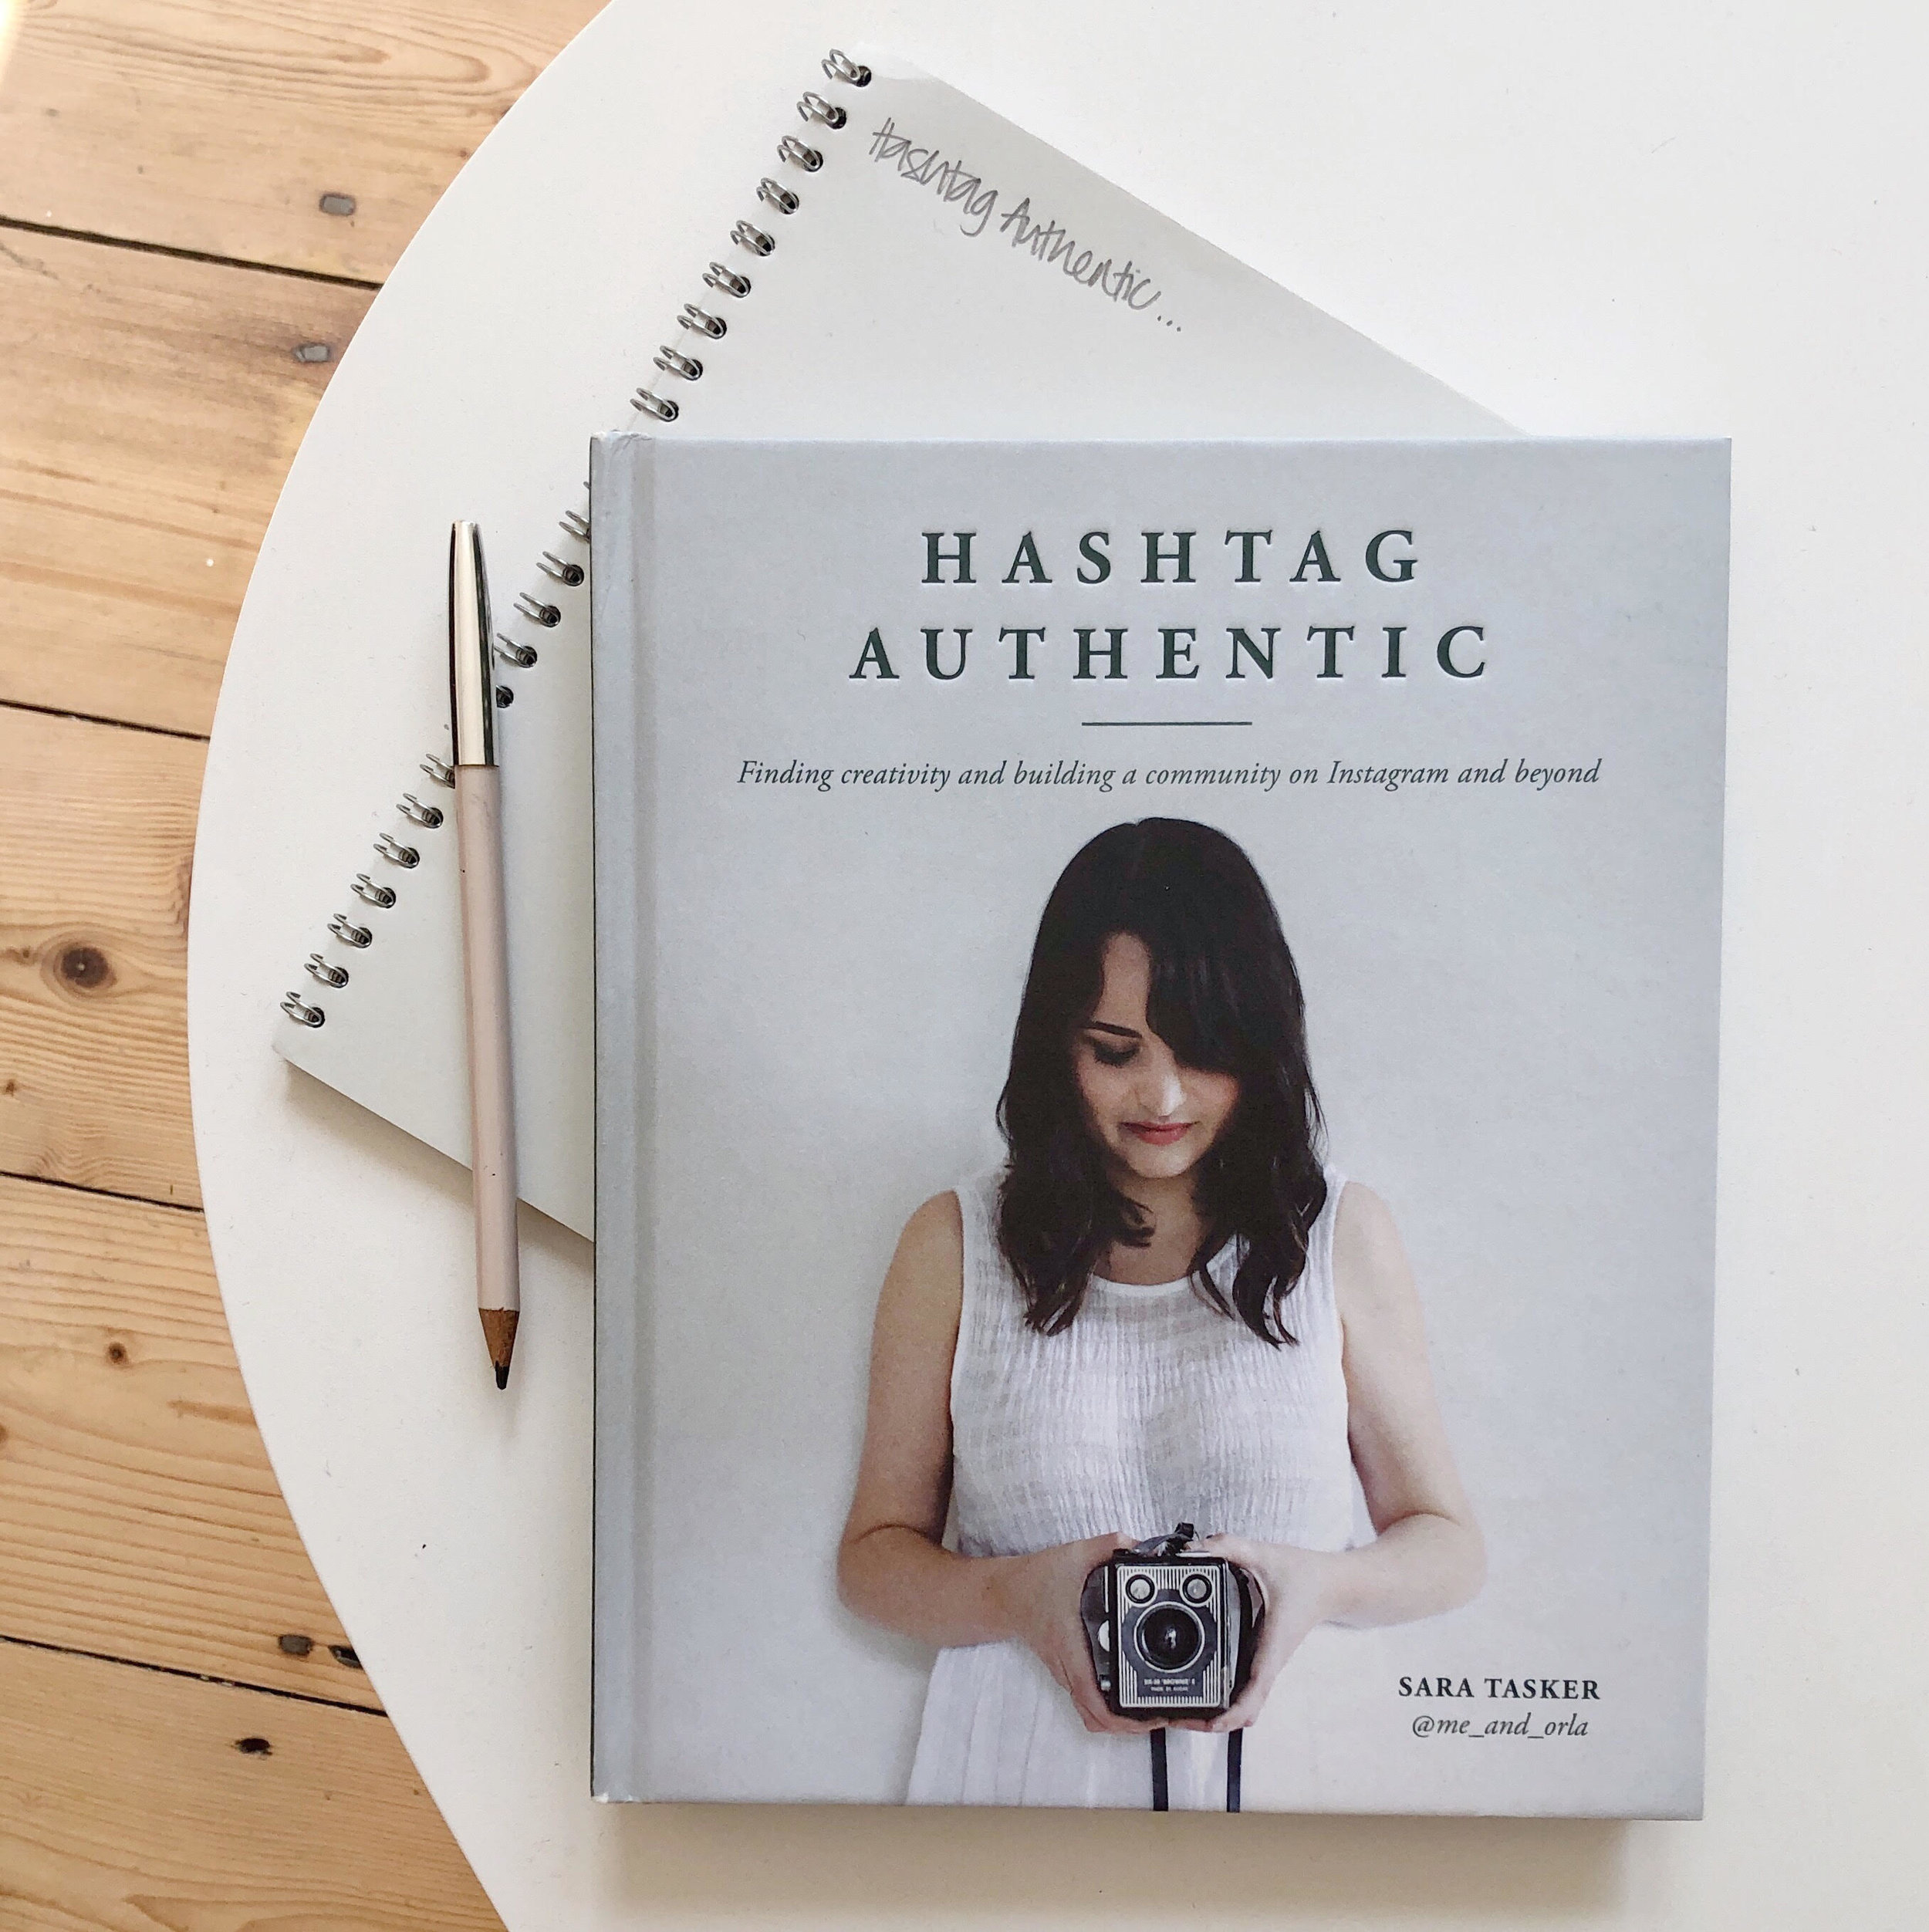 Hashtag Authentic by Sara Tasker